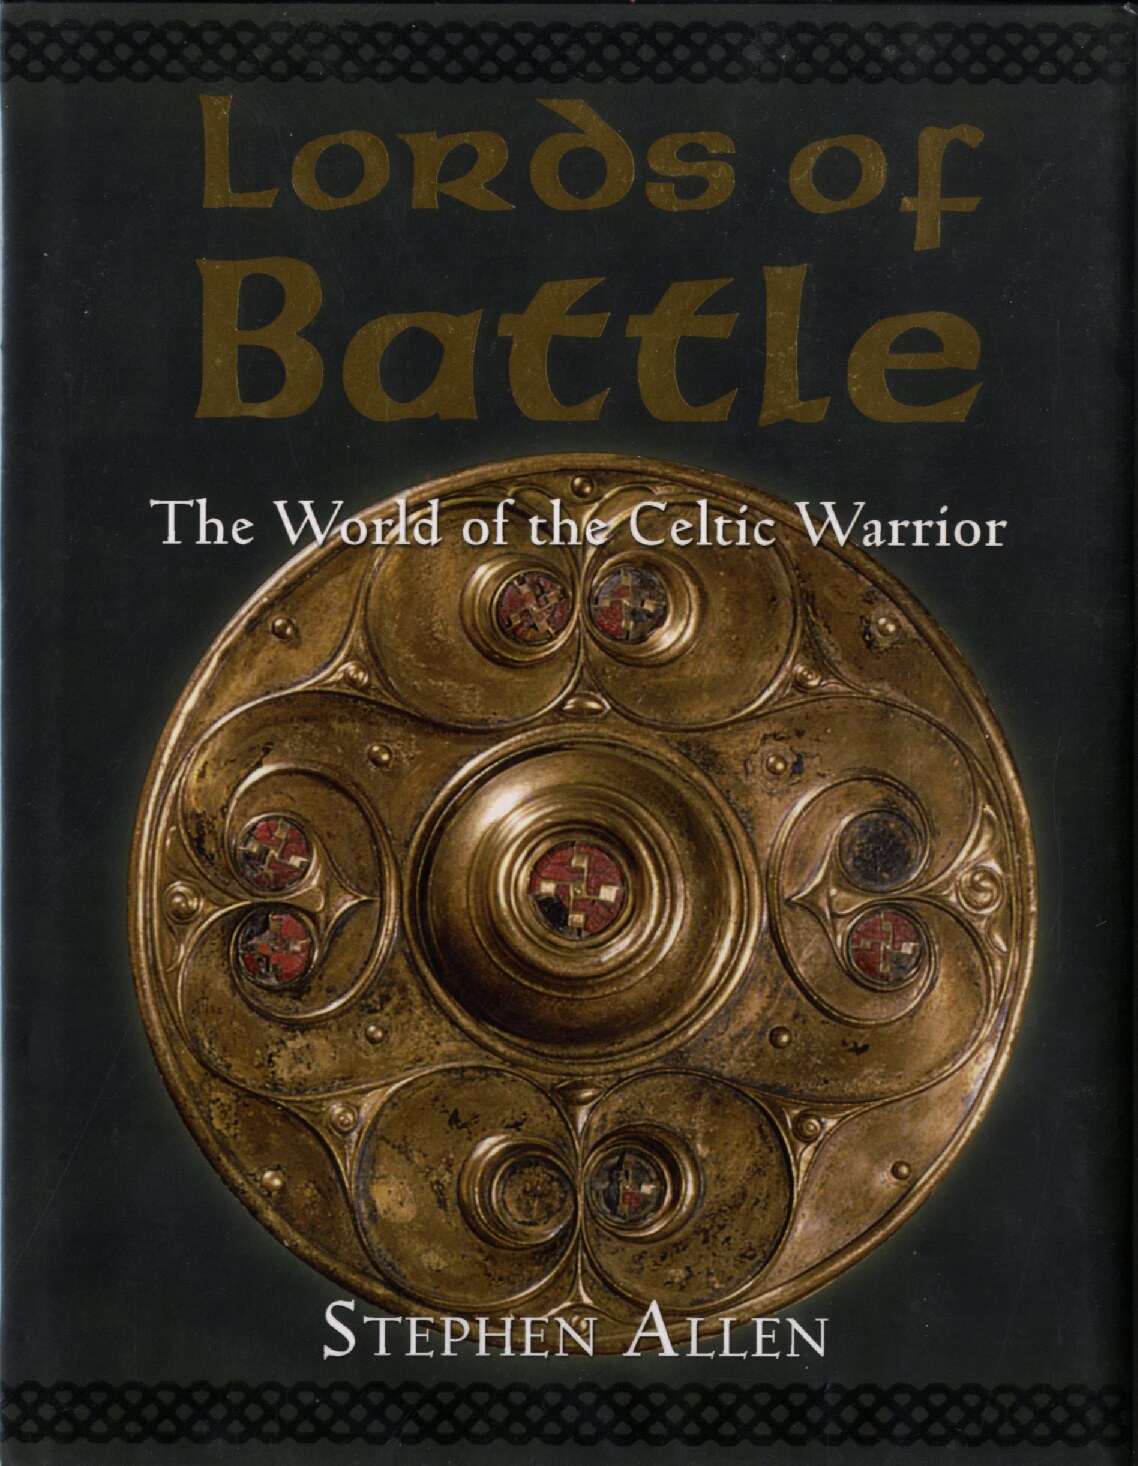 Allen, Stephen; Lords Of Battle - The World Of The Celtic Warrior